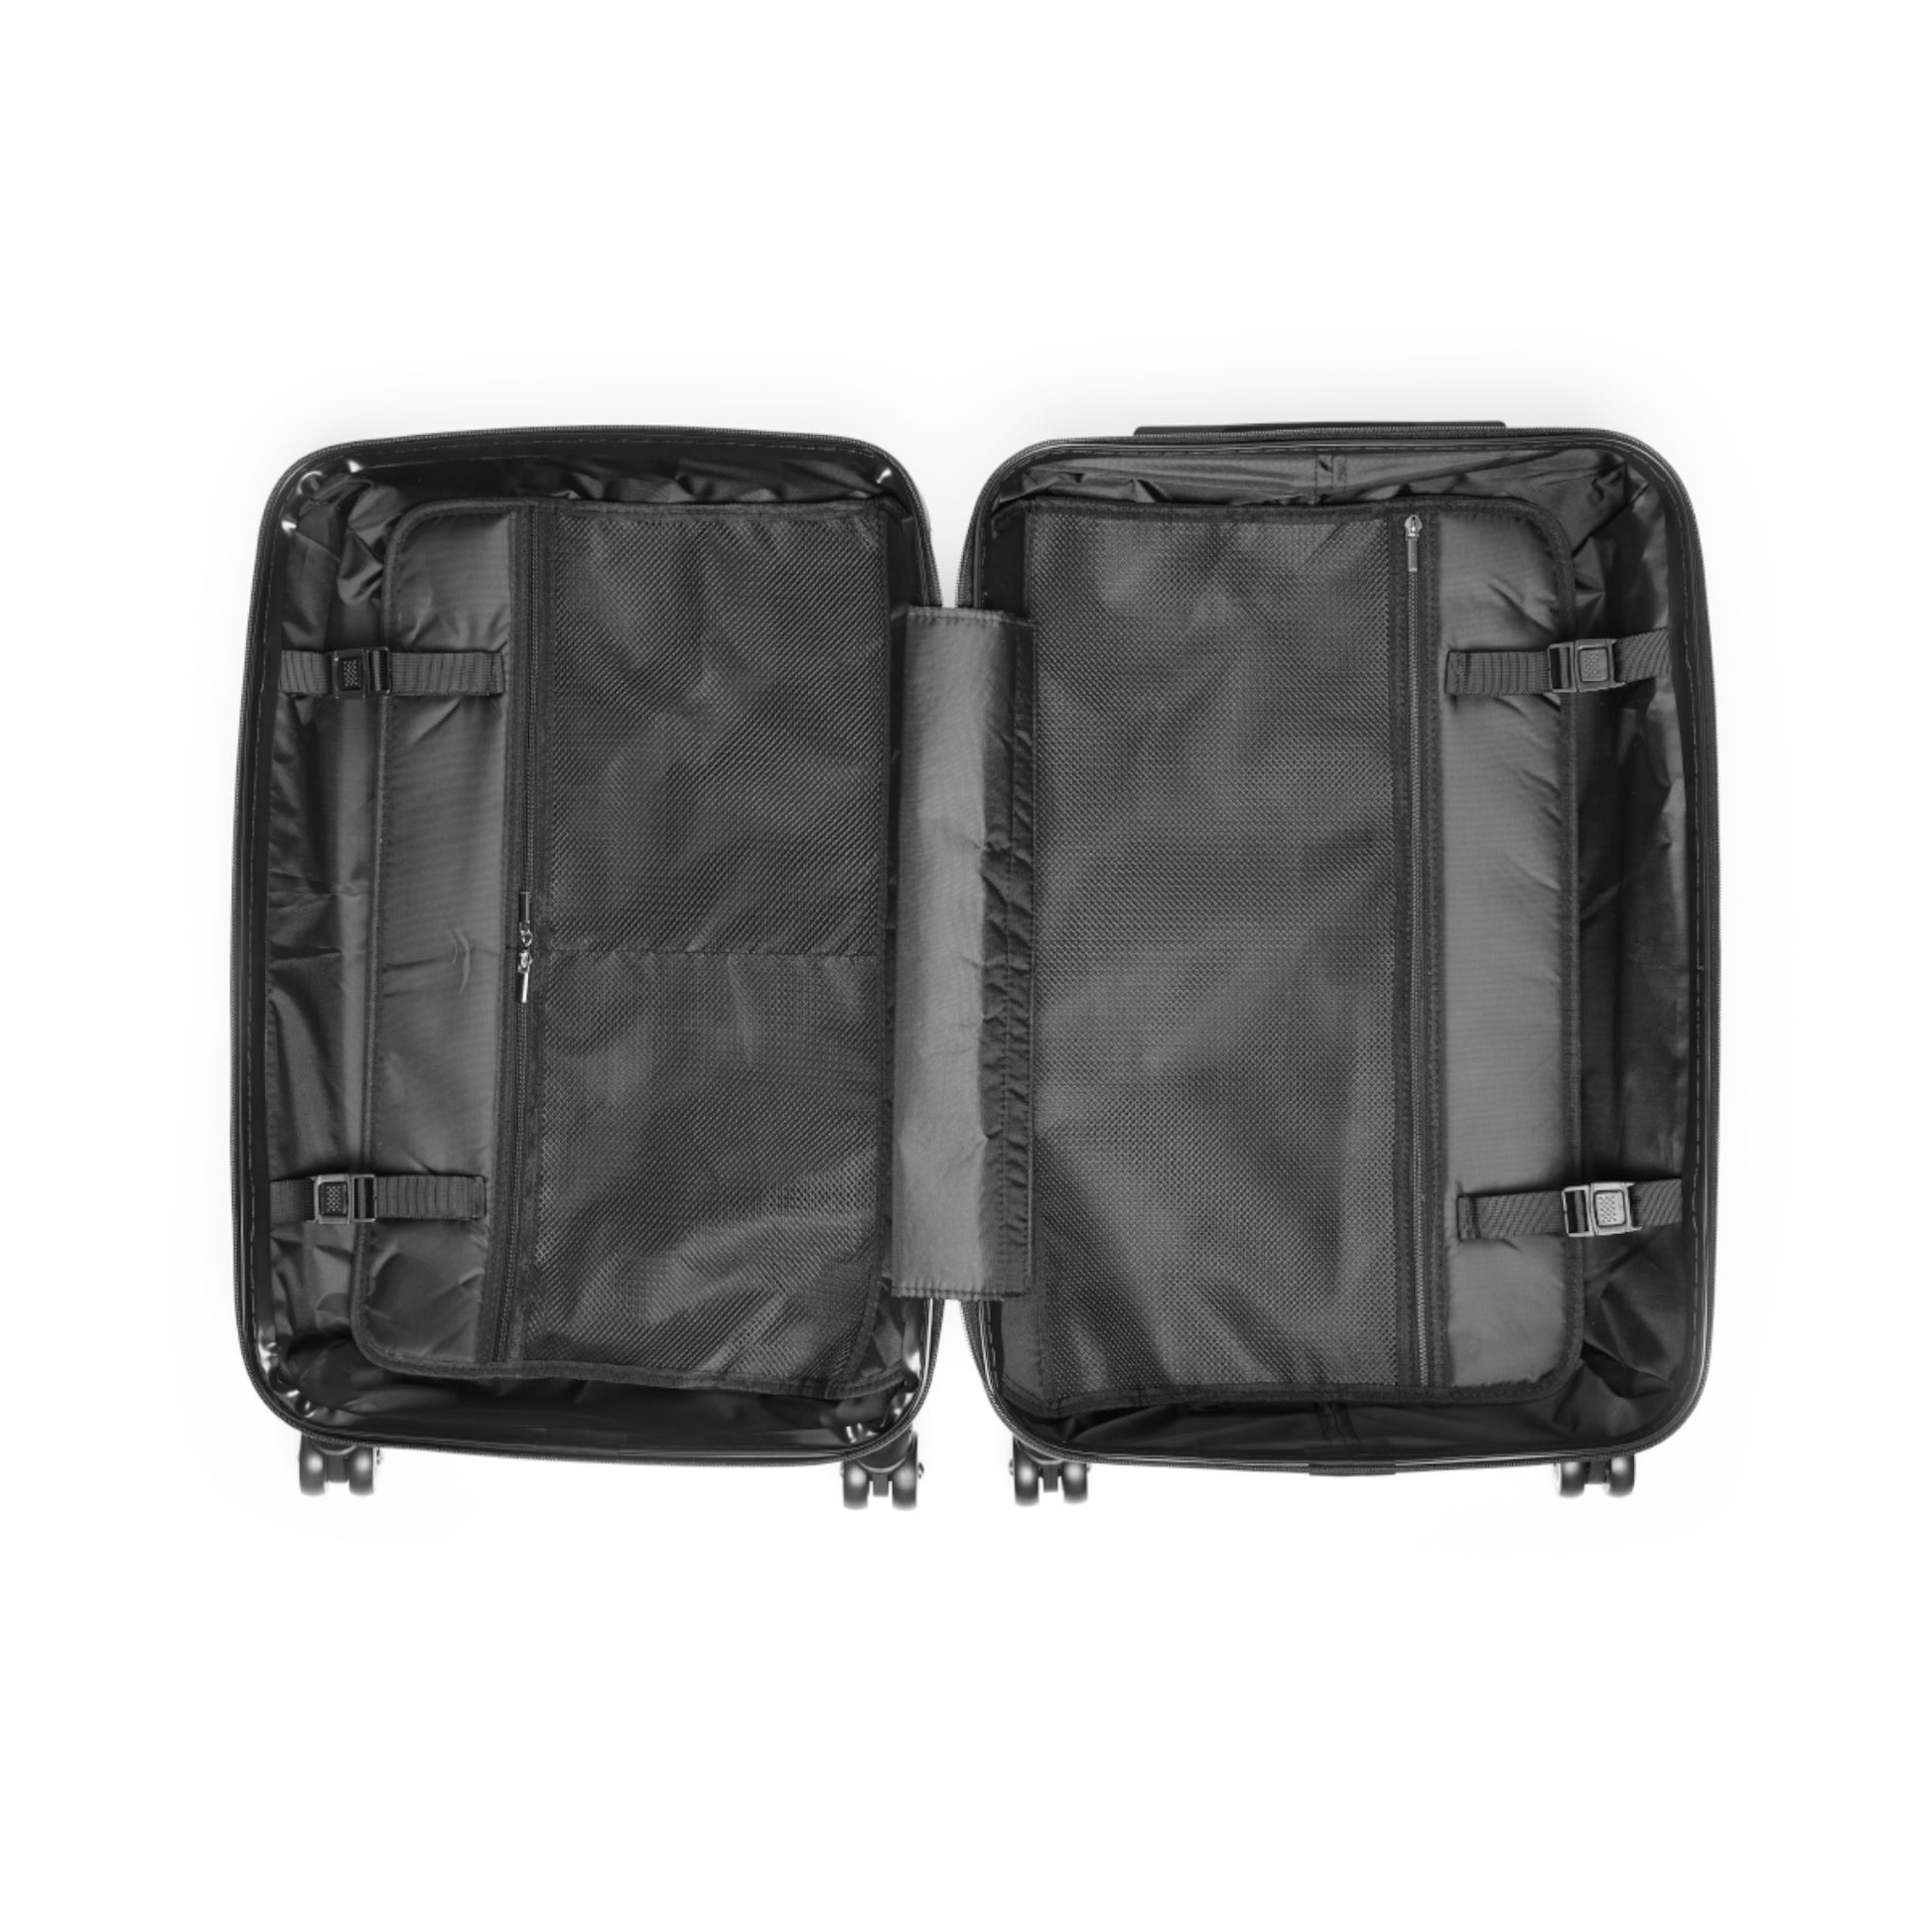 inside view of suitcase with pockets zipper straps